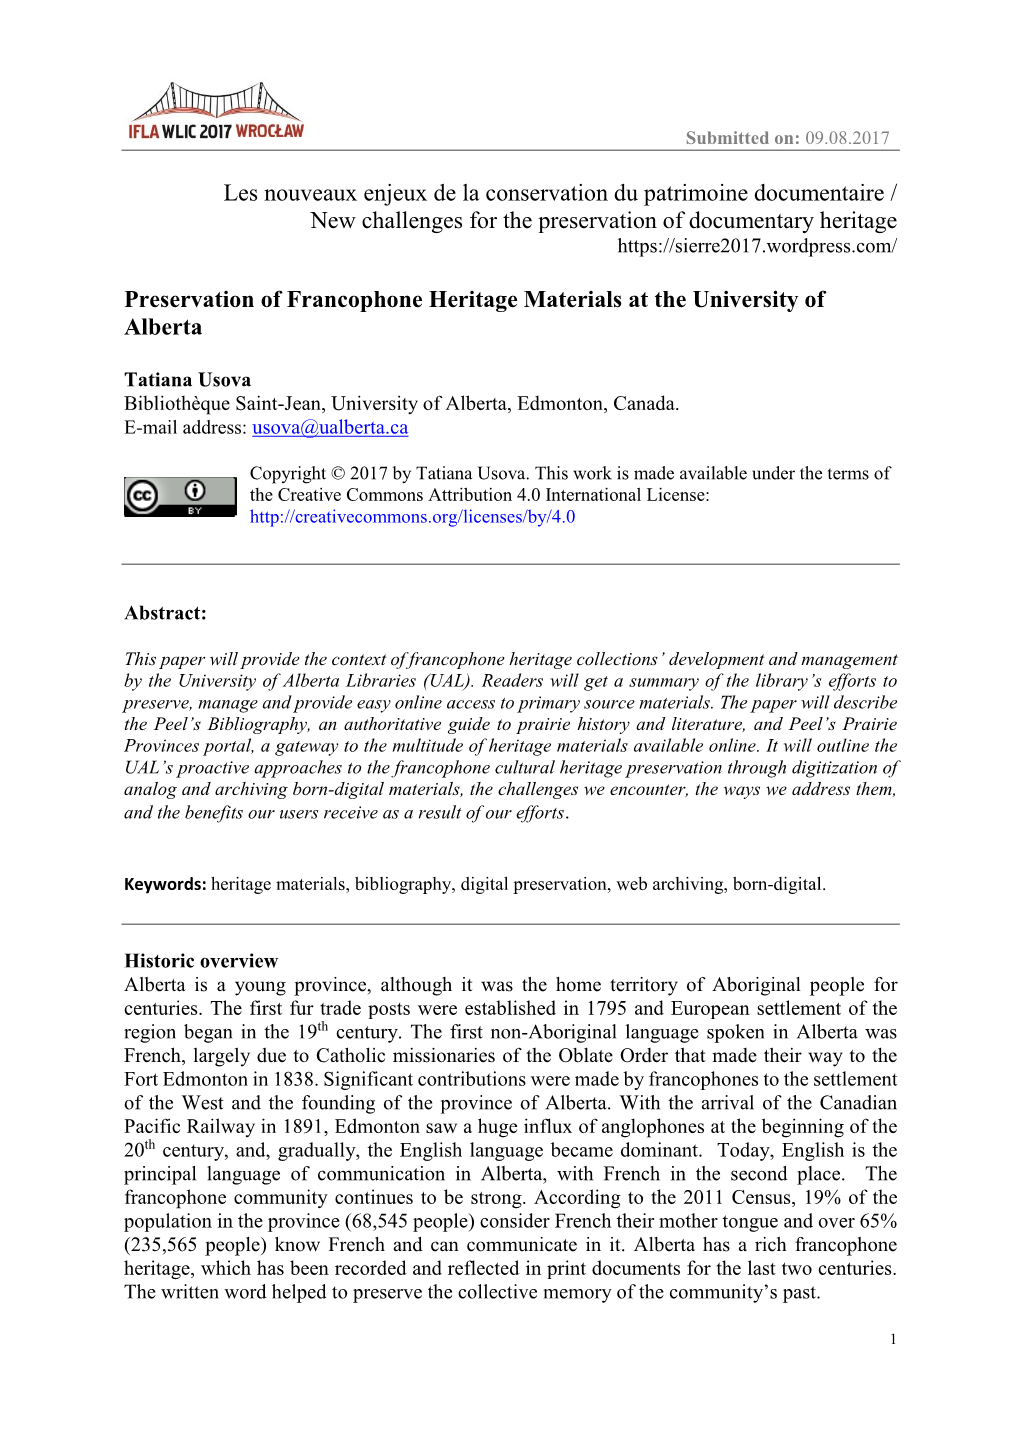 Preservation of Francophone Heritage Materials at the University of Alberta